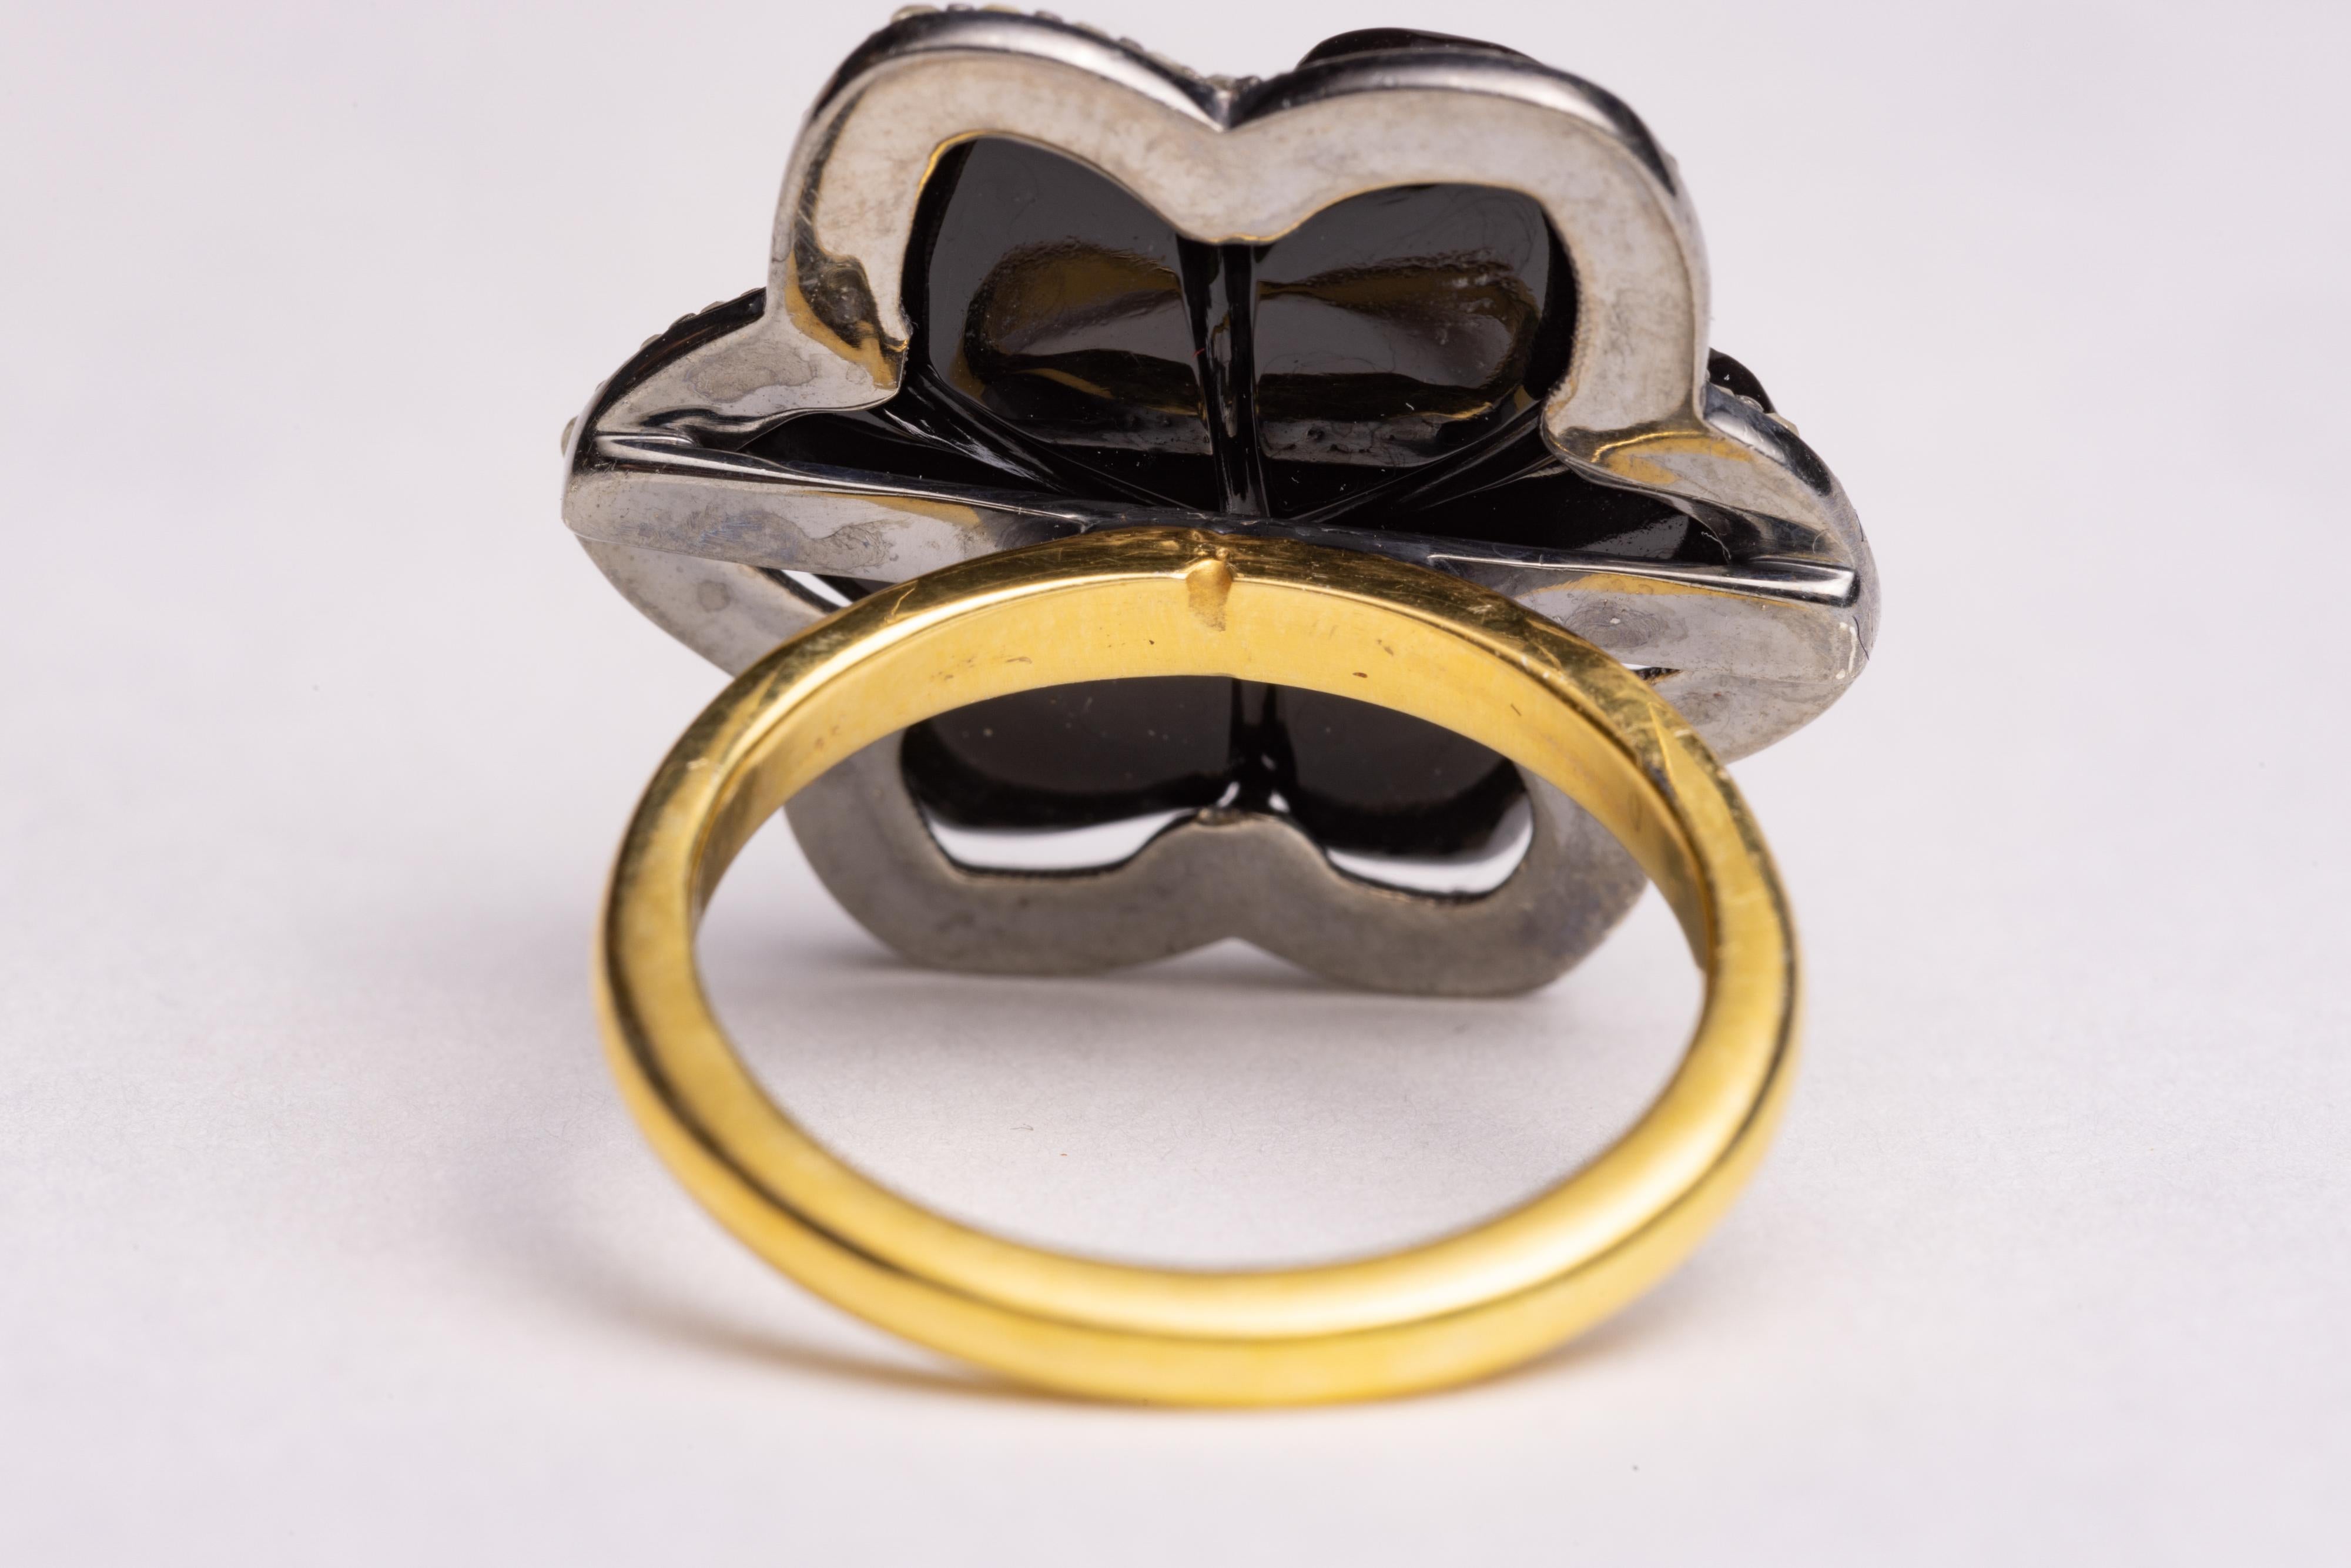 Flower Petal Ring in Black Onyx, Tanzanite and Diamonds In Excellent Condition For Sale In Nantucket, MA